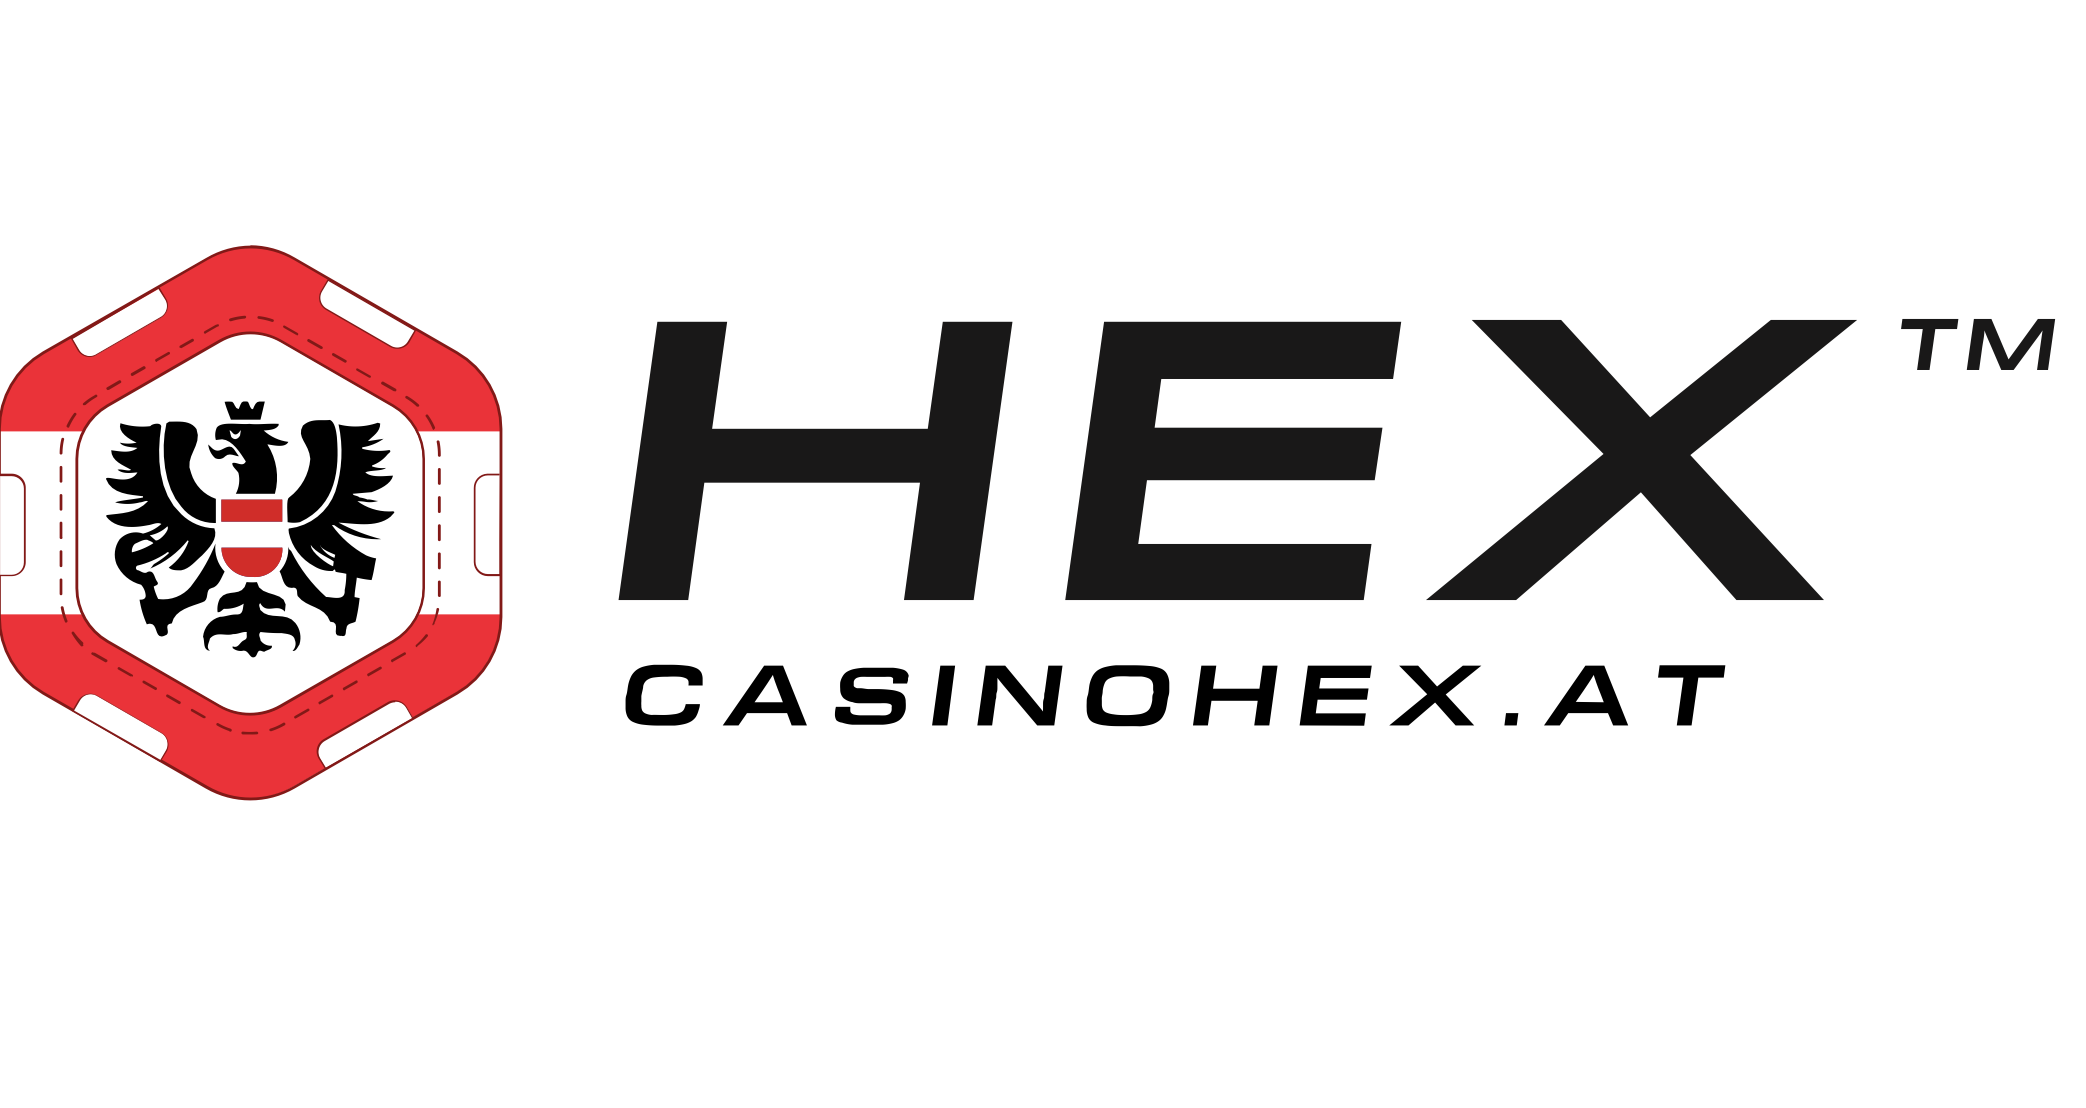 http://casinohex.at/